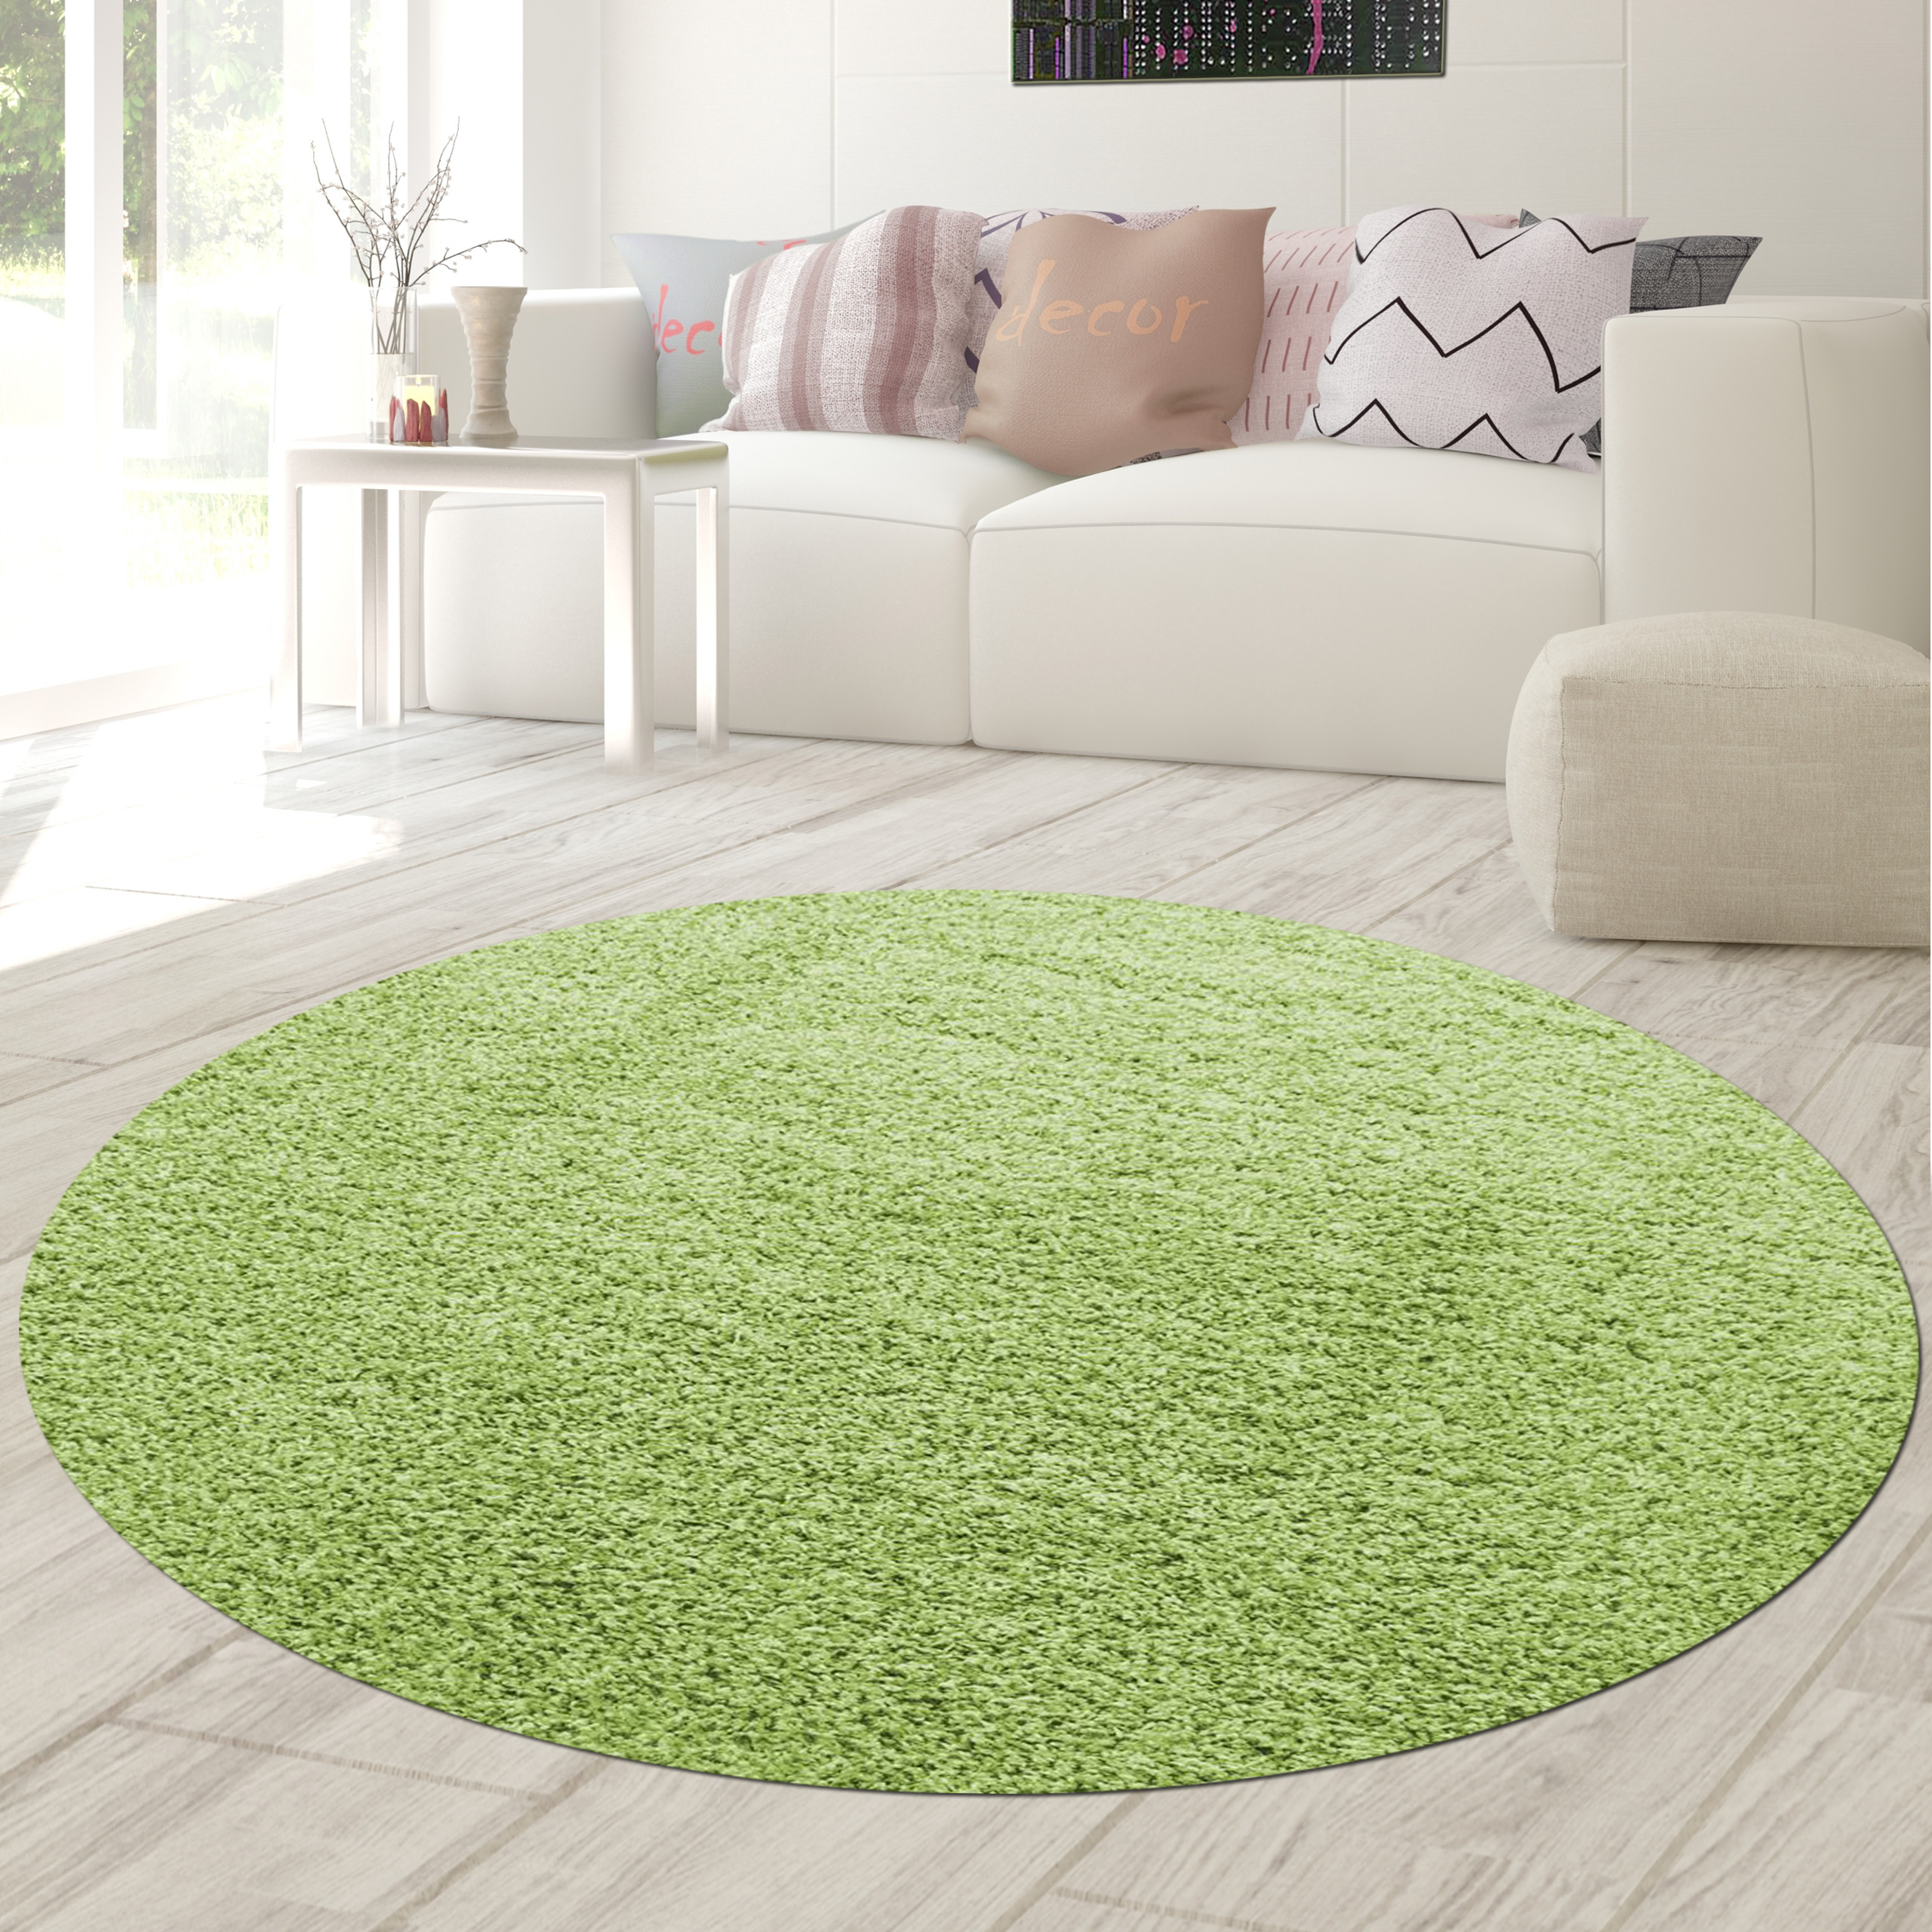 Shag carpet emission gr weight (approx) m² Total Merilon overall 2.2 polypropylenes (approx) 100% 30mm - free / frisee, Teppich-Traum height